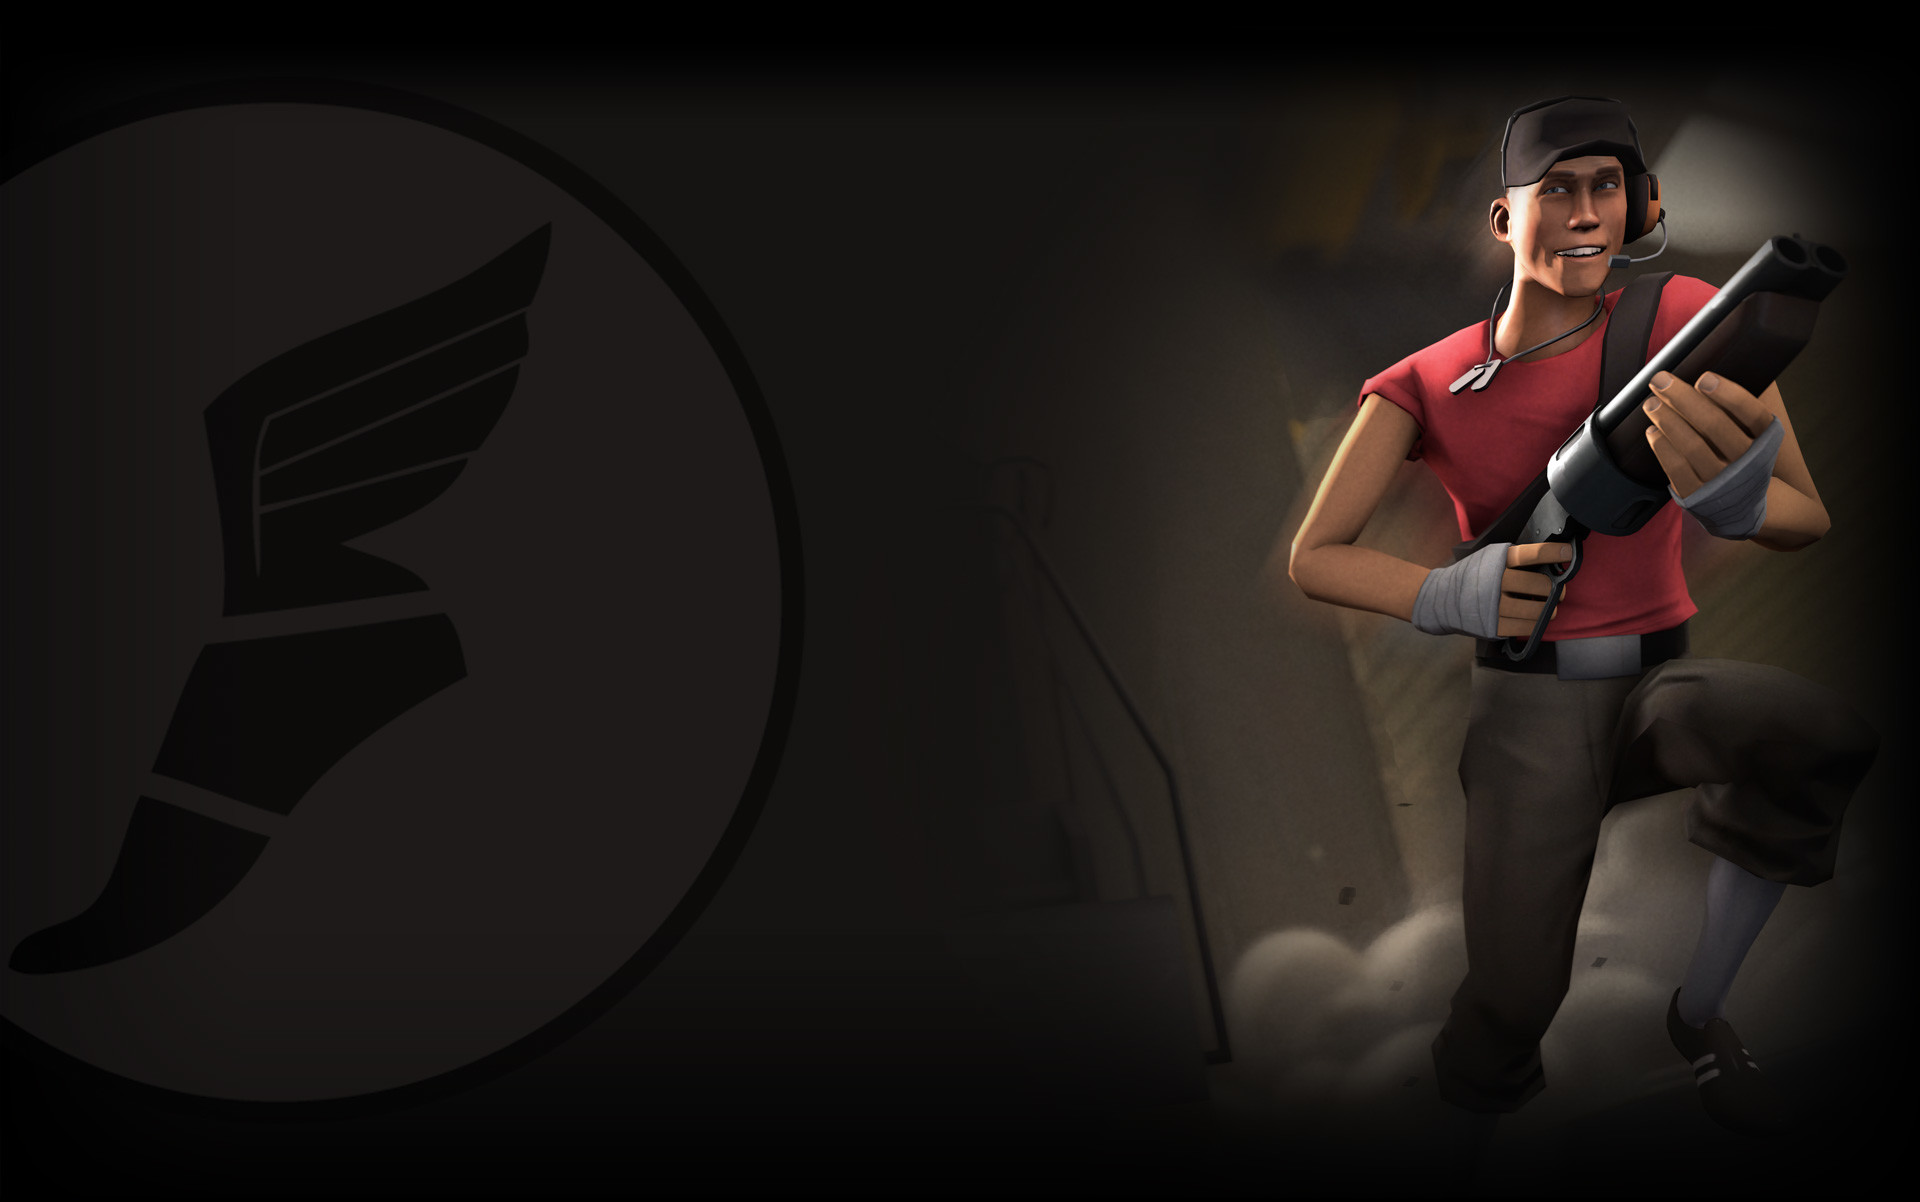 1920x1202 Team Fortress 2 Profile Background. View Full Size